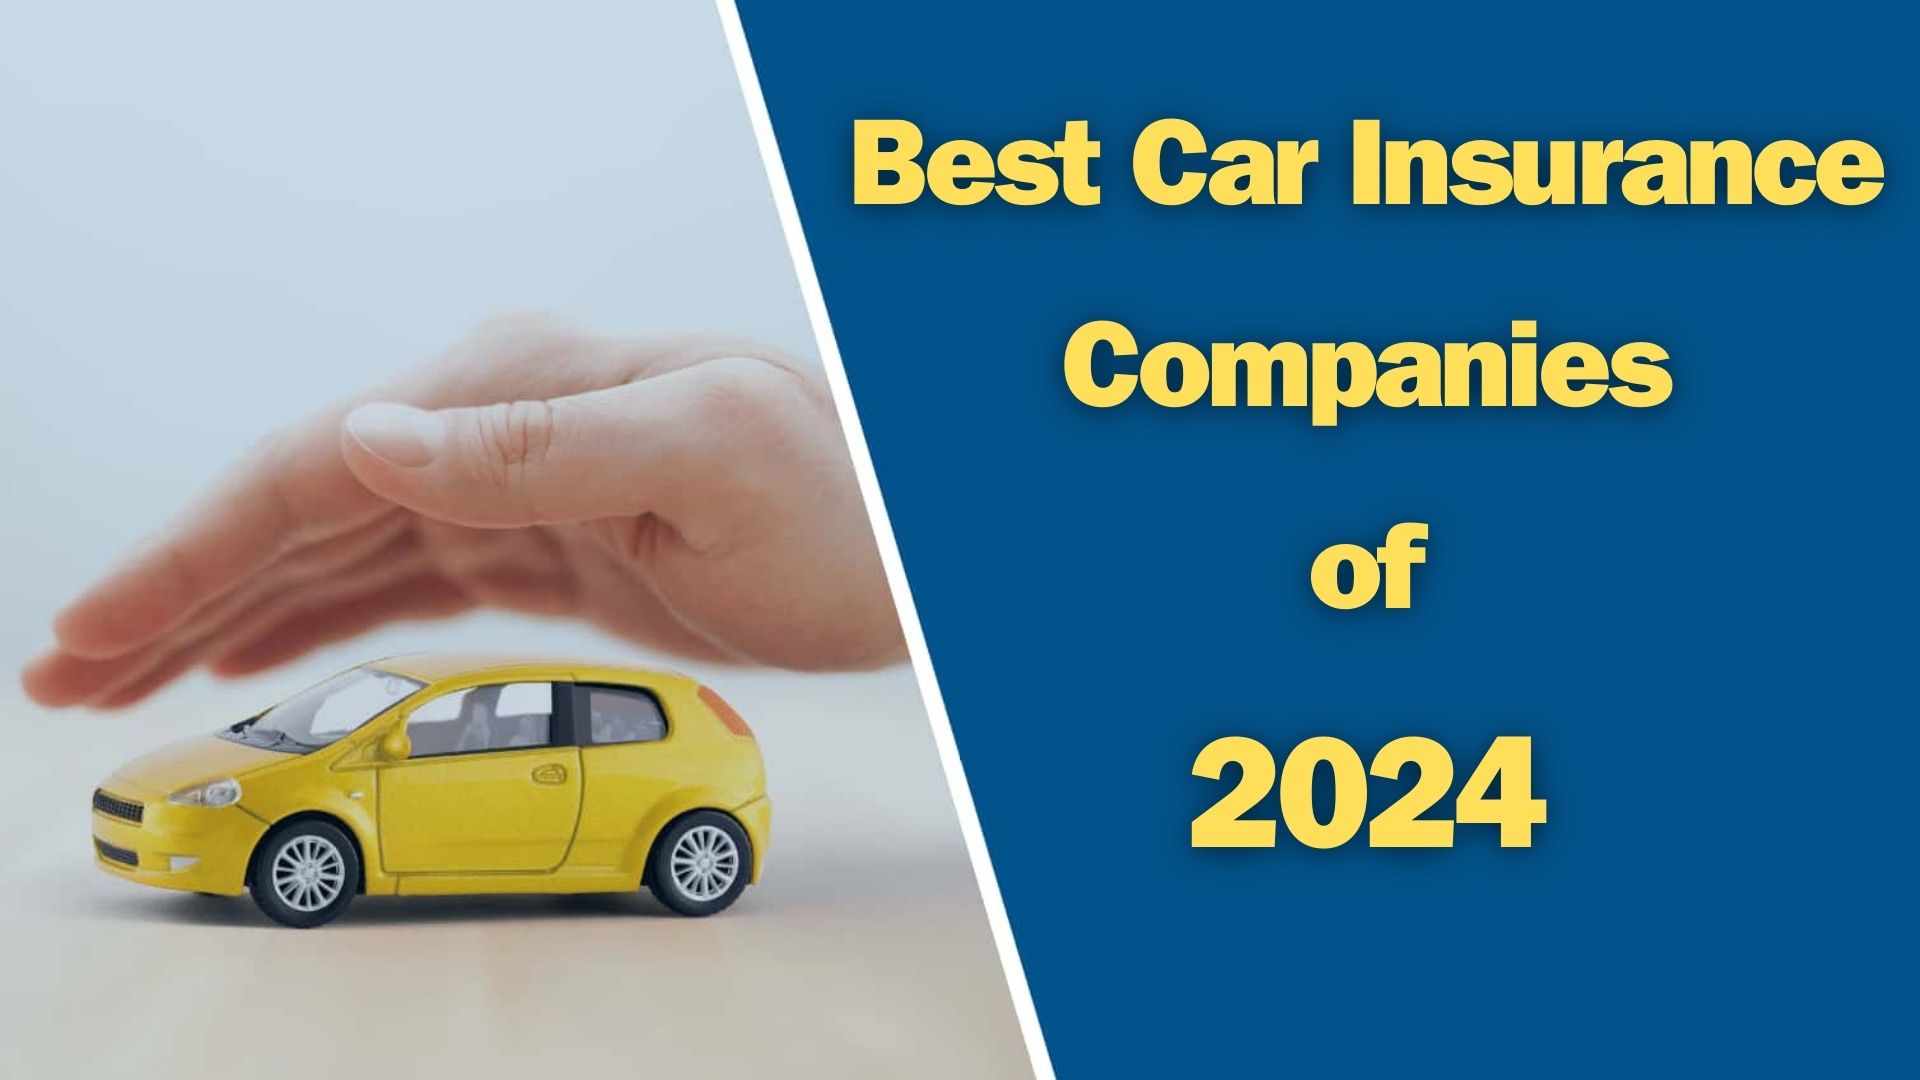  Best Car Insurance Companies of 2024 in USA 